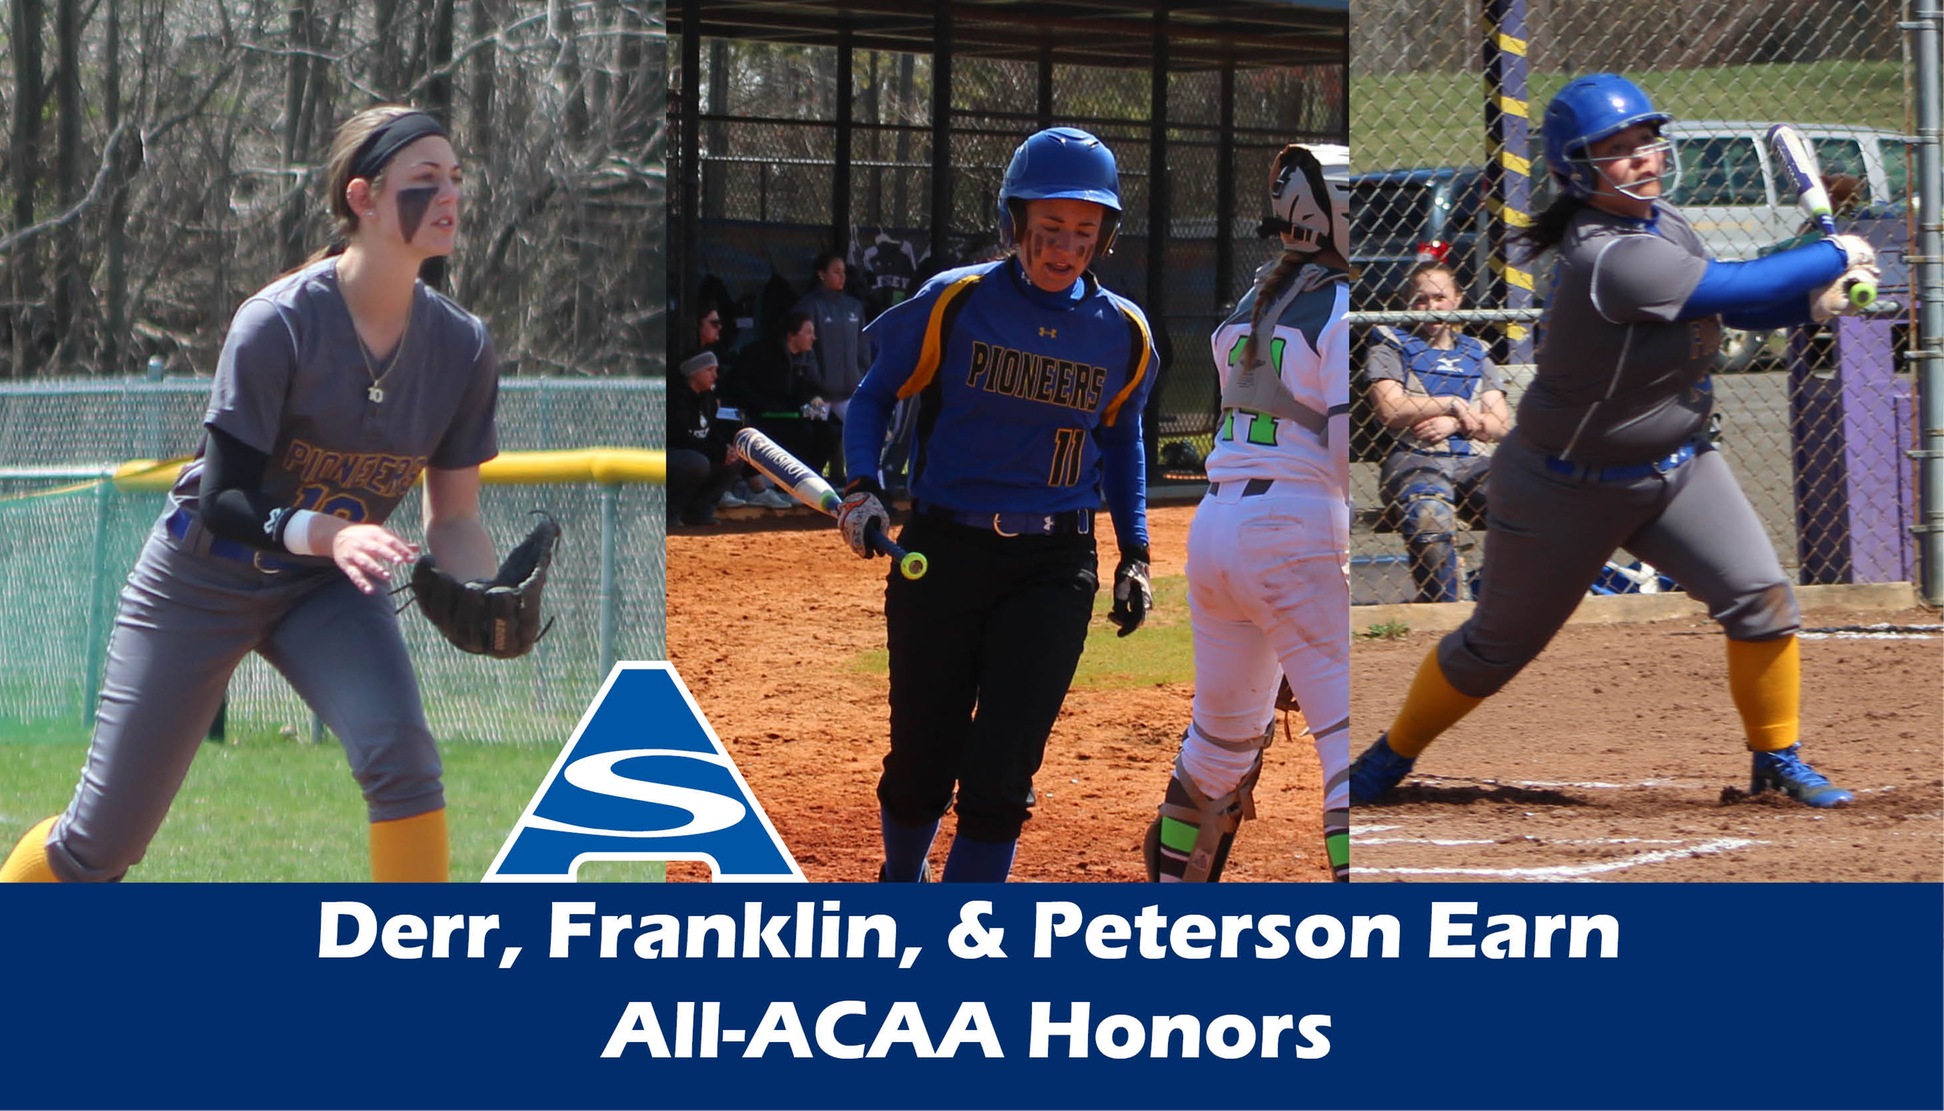 Zoe Derr, Morgan Franklin, and Ashley Peterson have been named All-ACAA